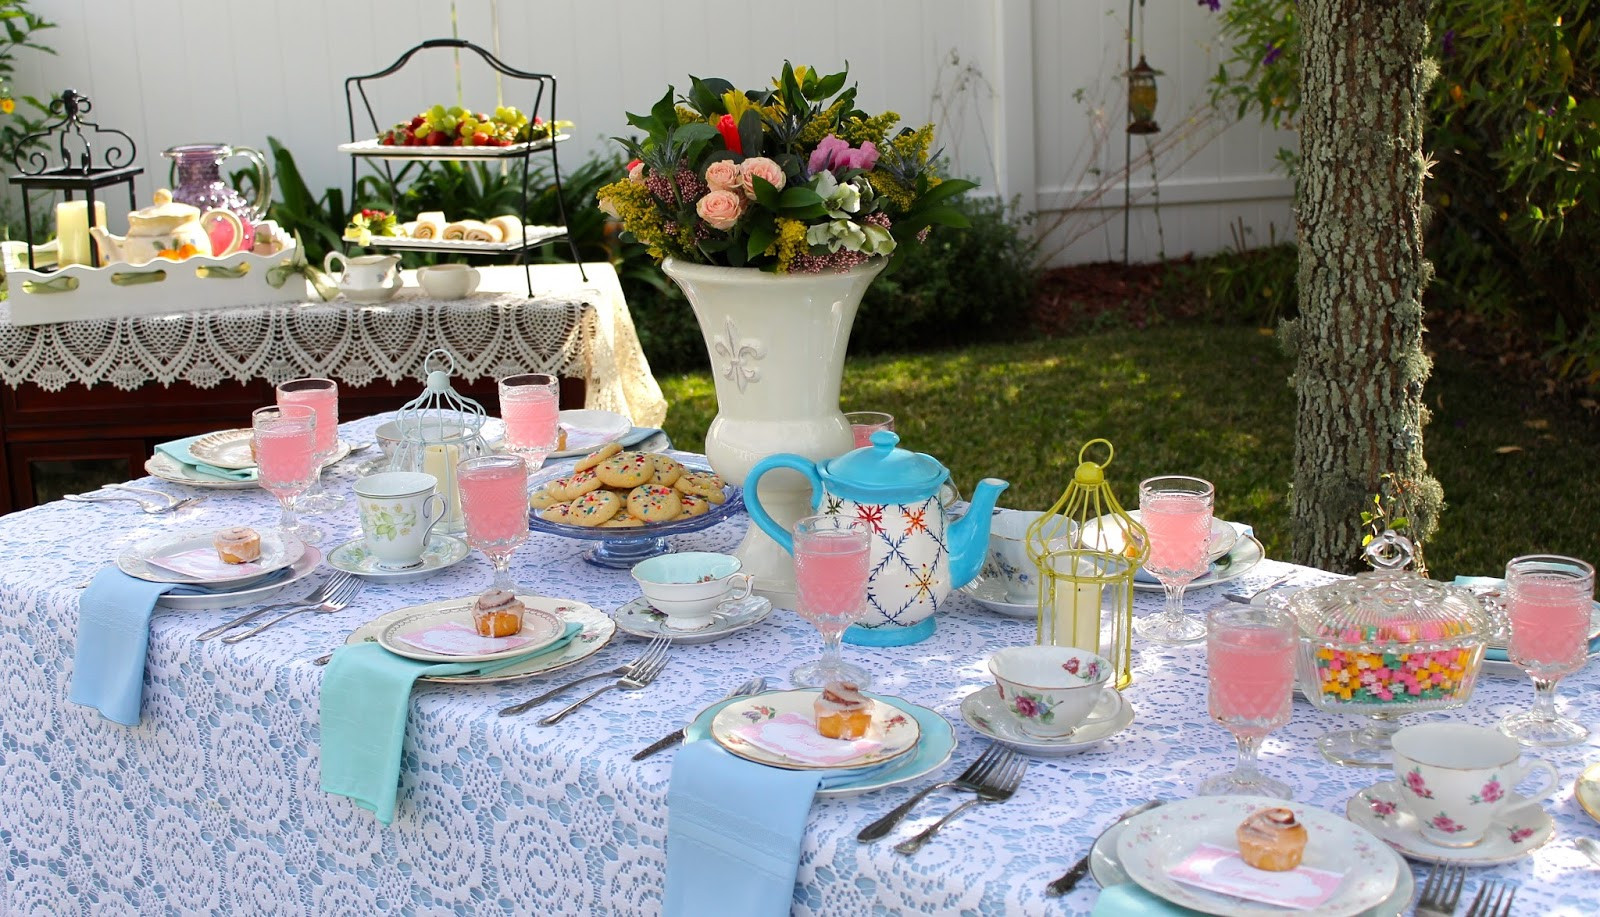 Summer Afternoon Tea Party Ideas
 Love Thy Room Vintage Summer Girls Tea Party Tablescape